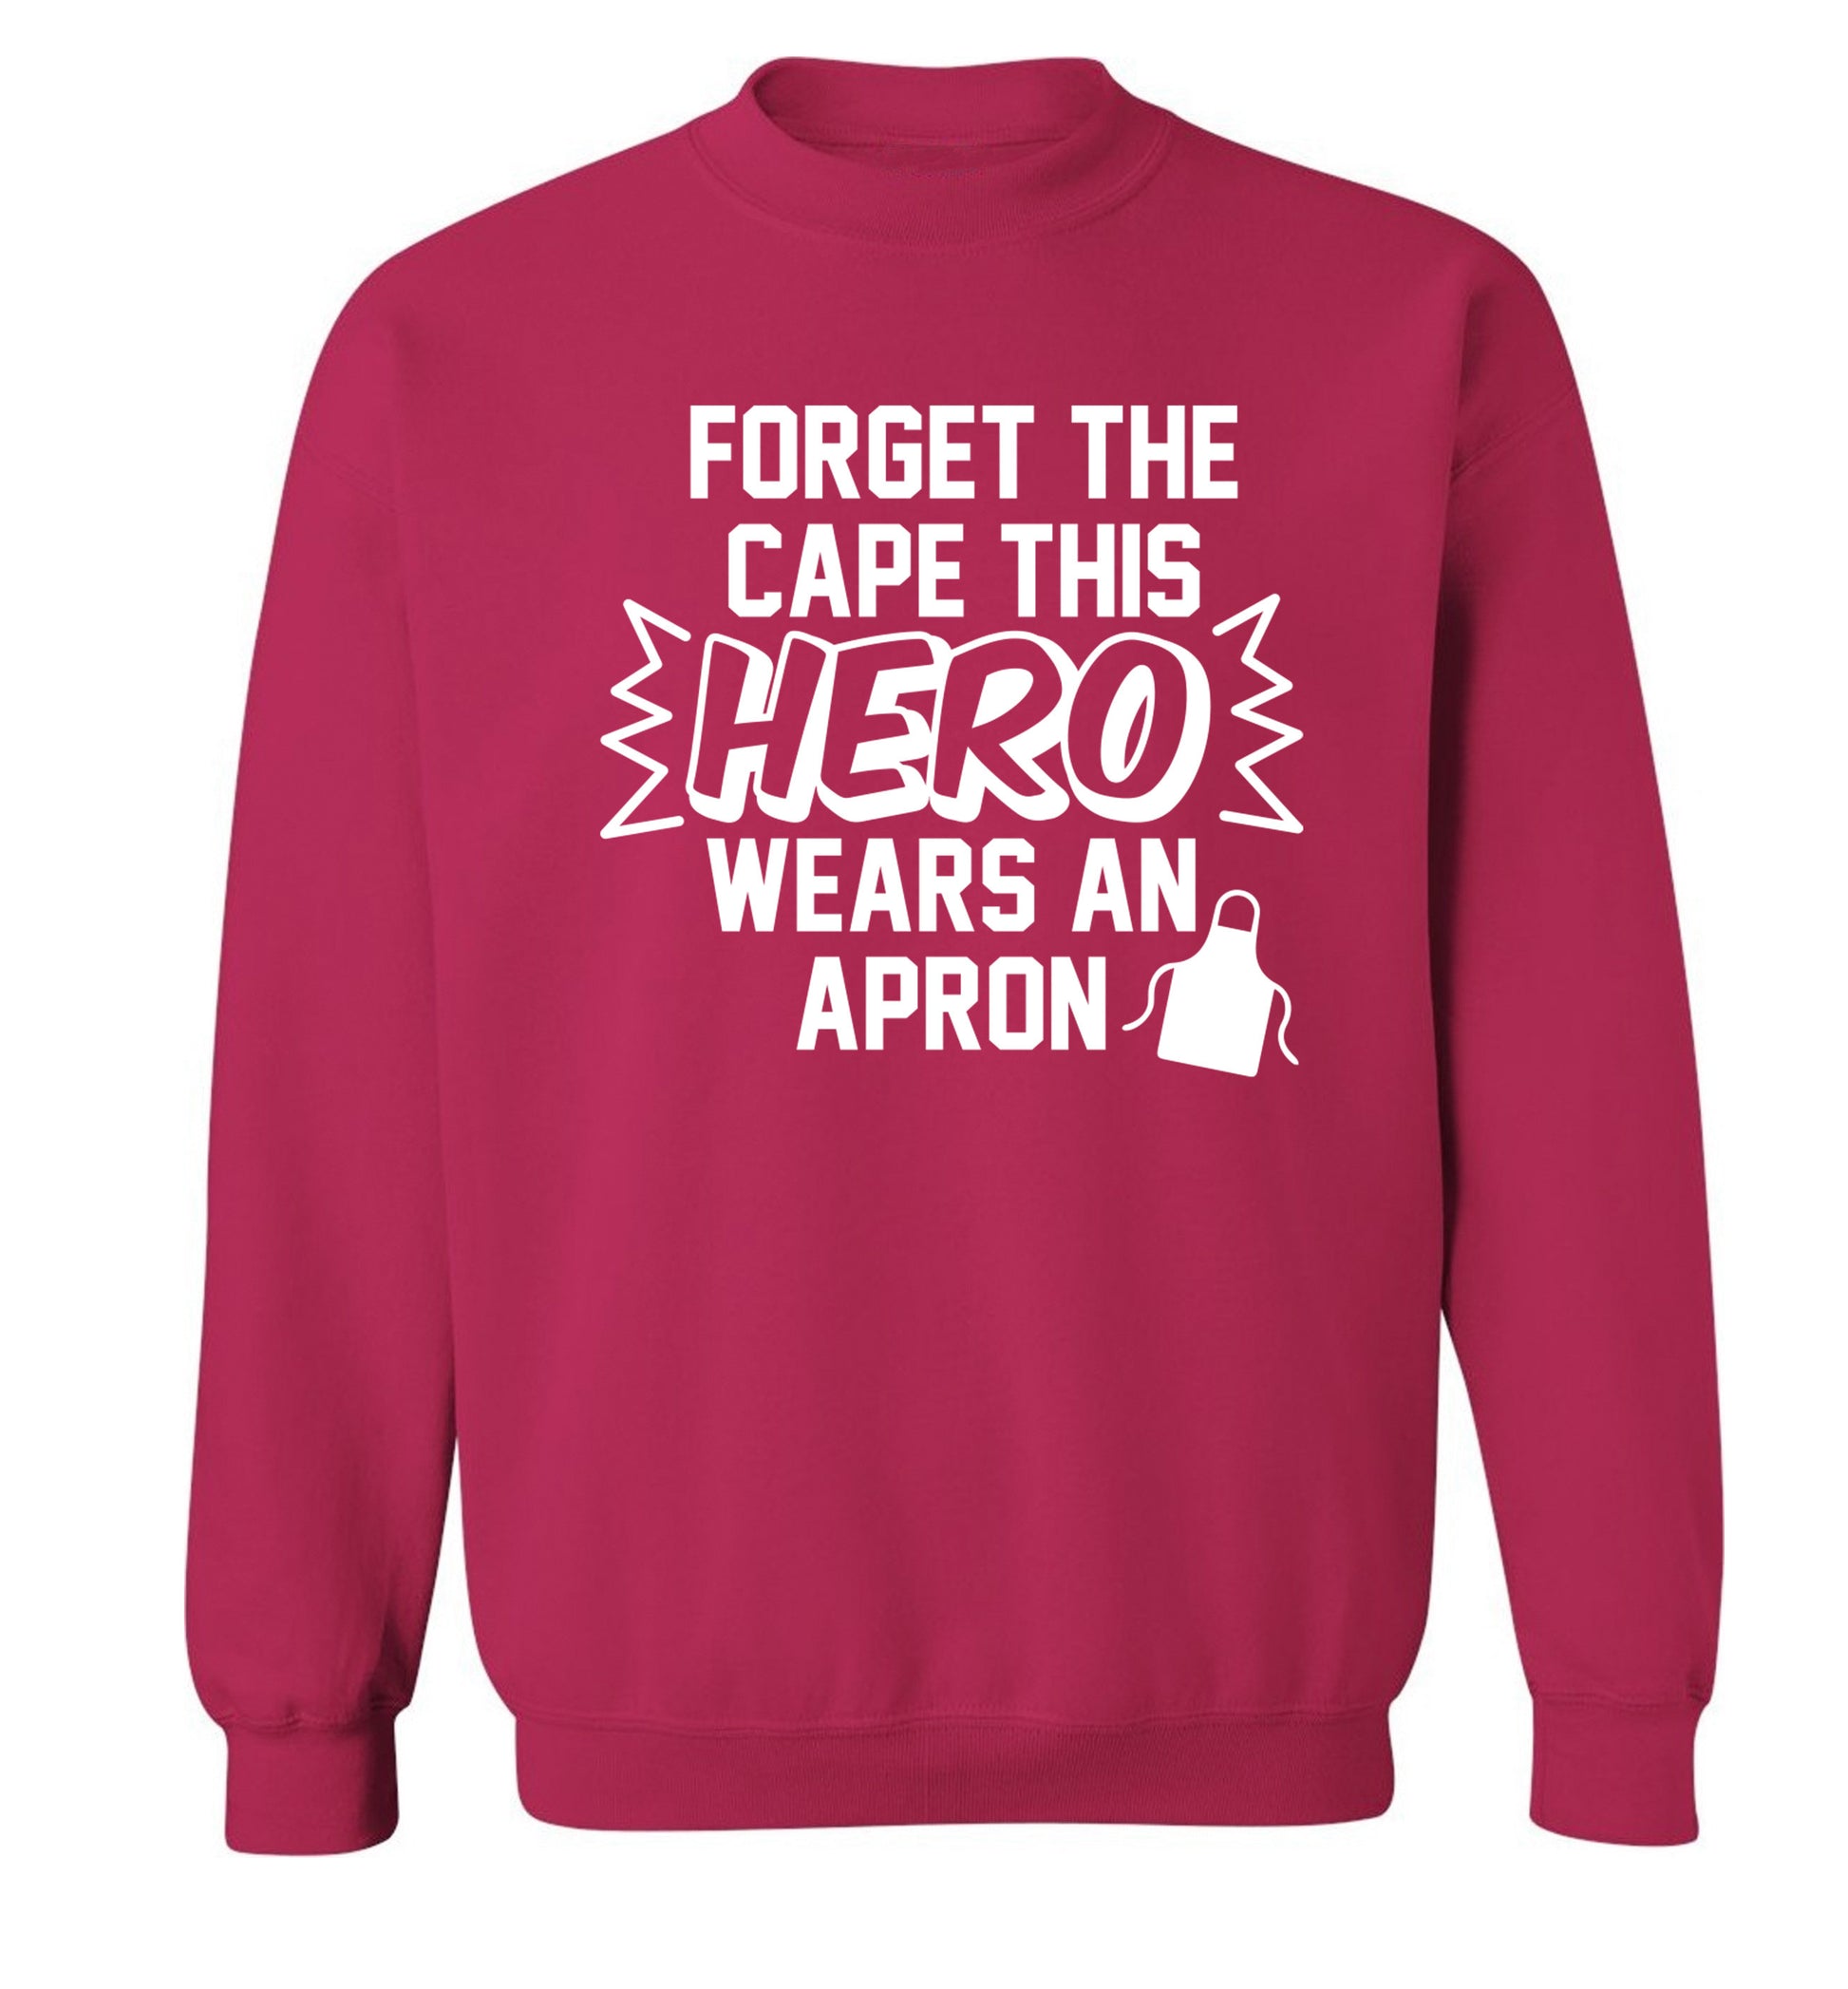 Forget the cape this hero wears an apron Adult's unisex pink Sweater 2XL